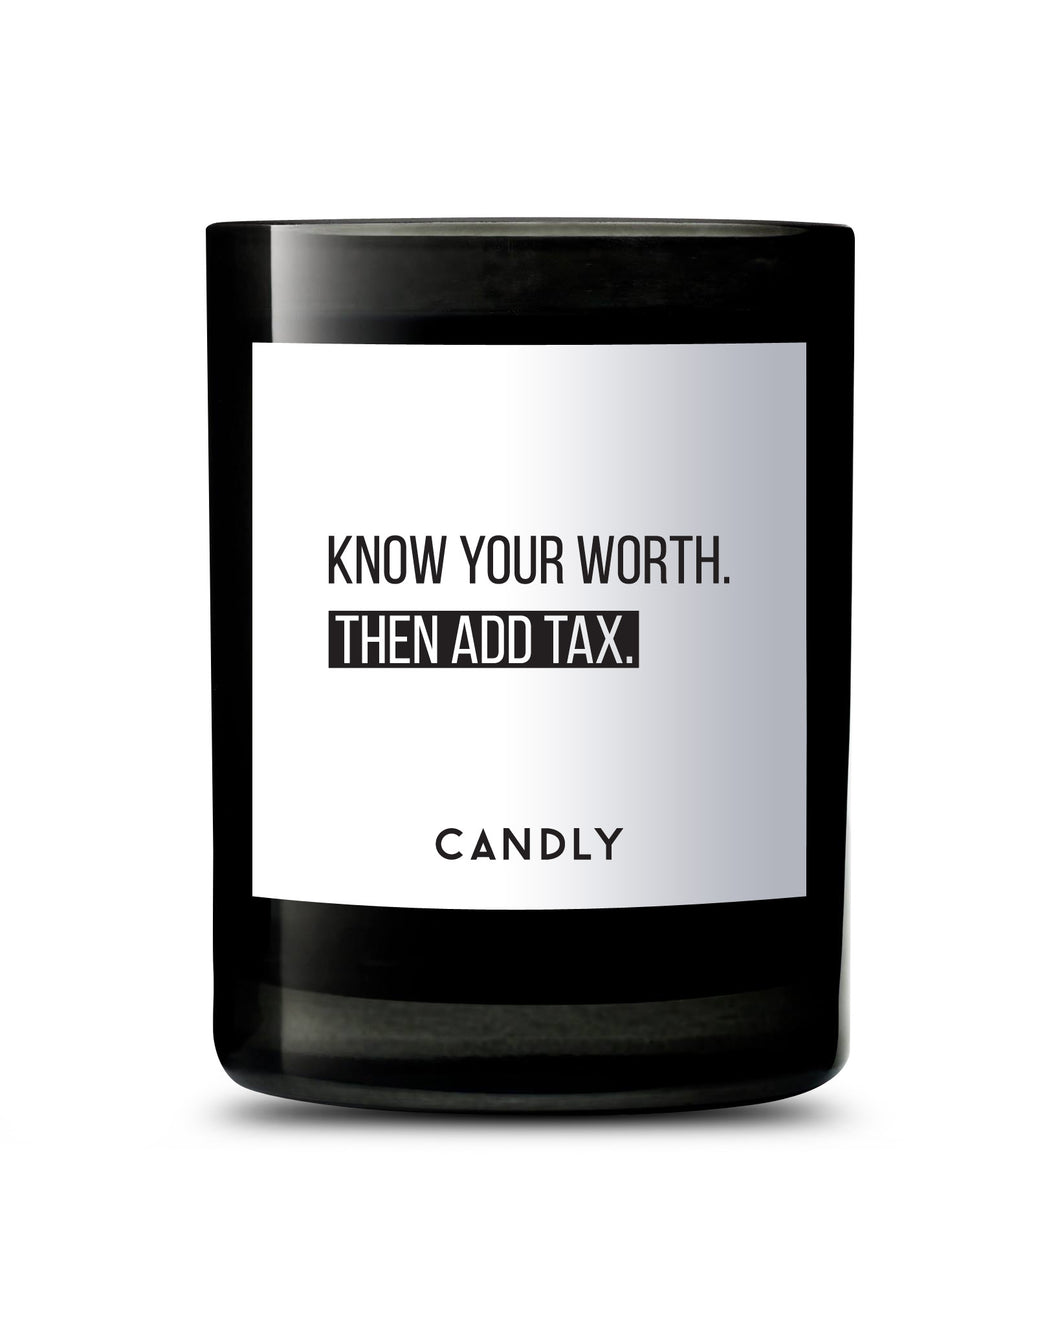 The Worth/Tax Candle